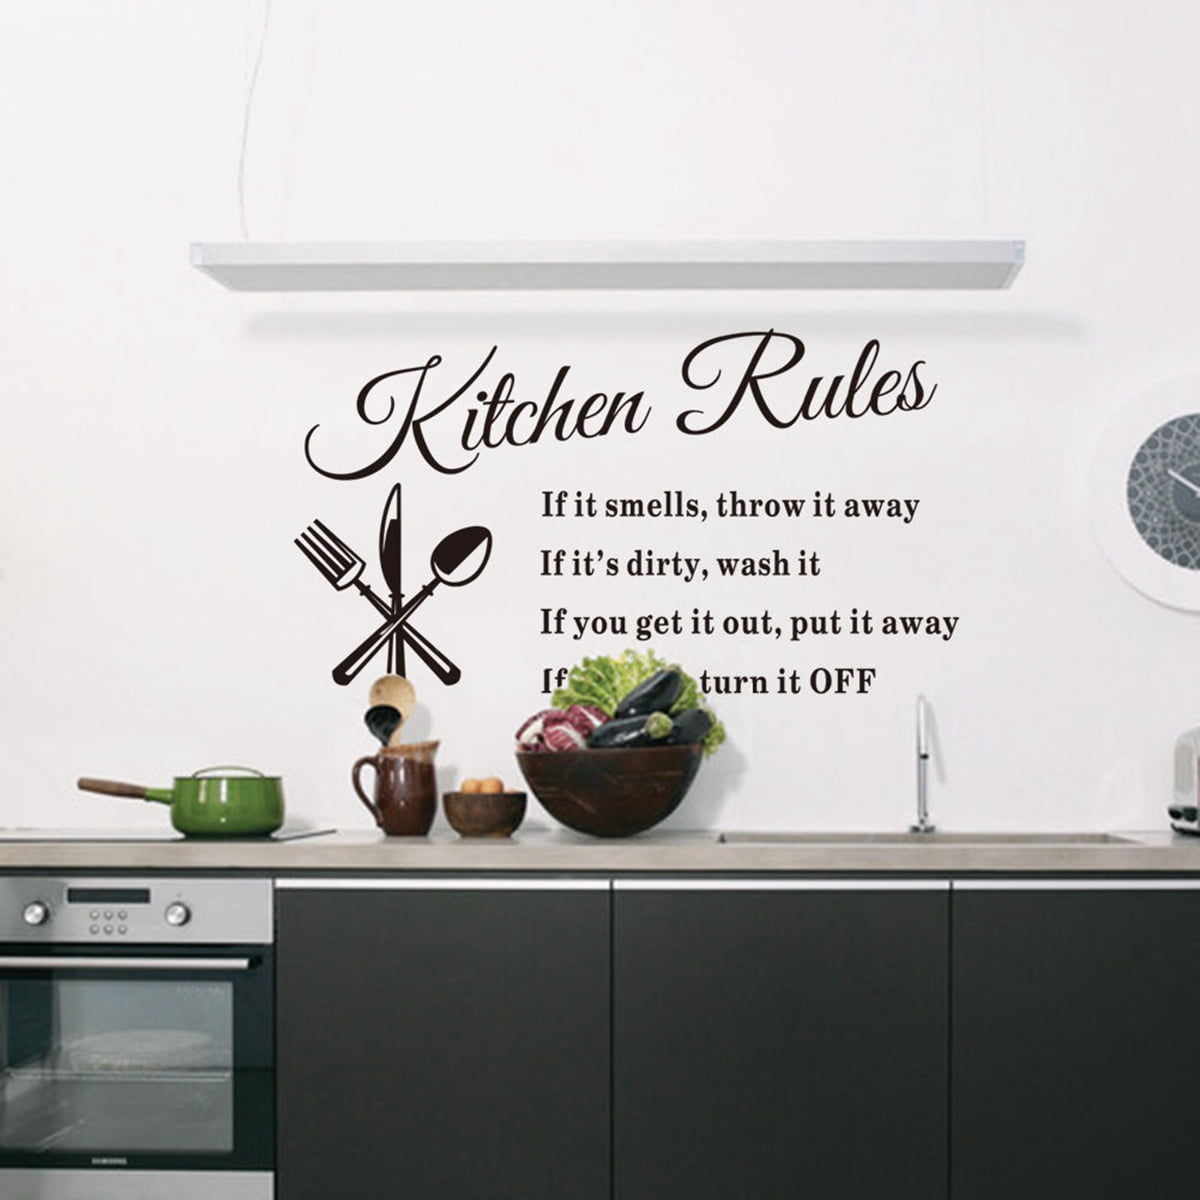 Personalised Family Kitchen Quote Mural Words Home Vinyl Wall Sticker Decal